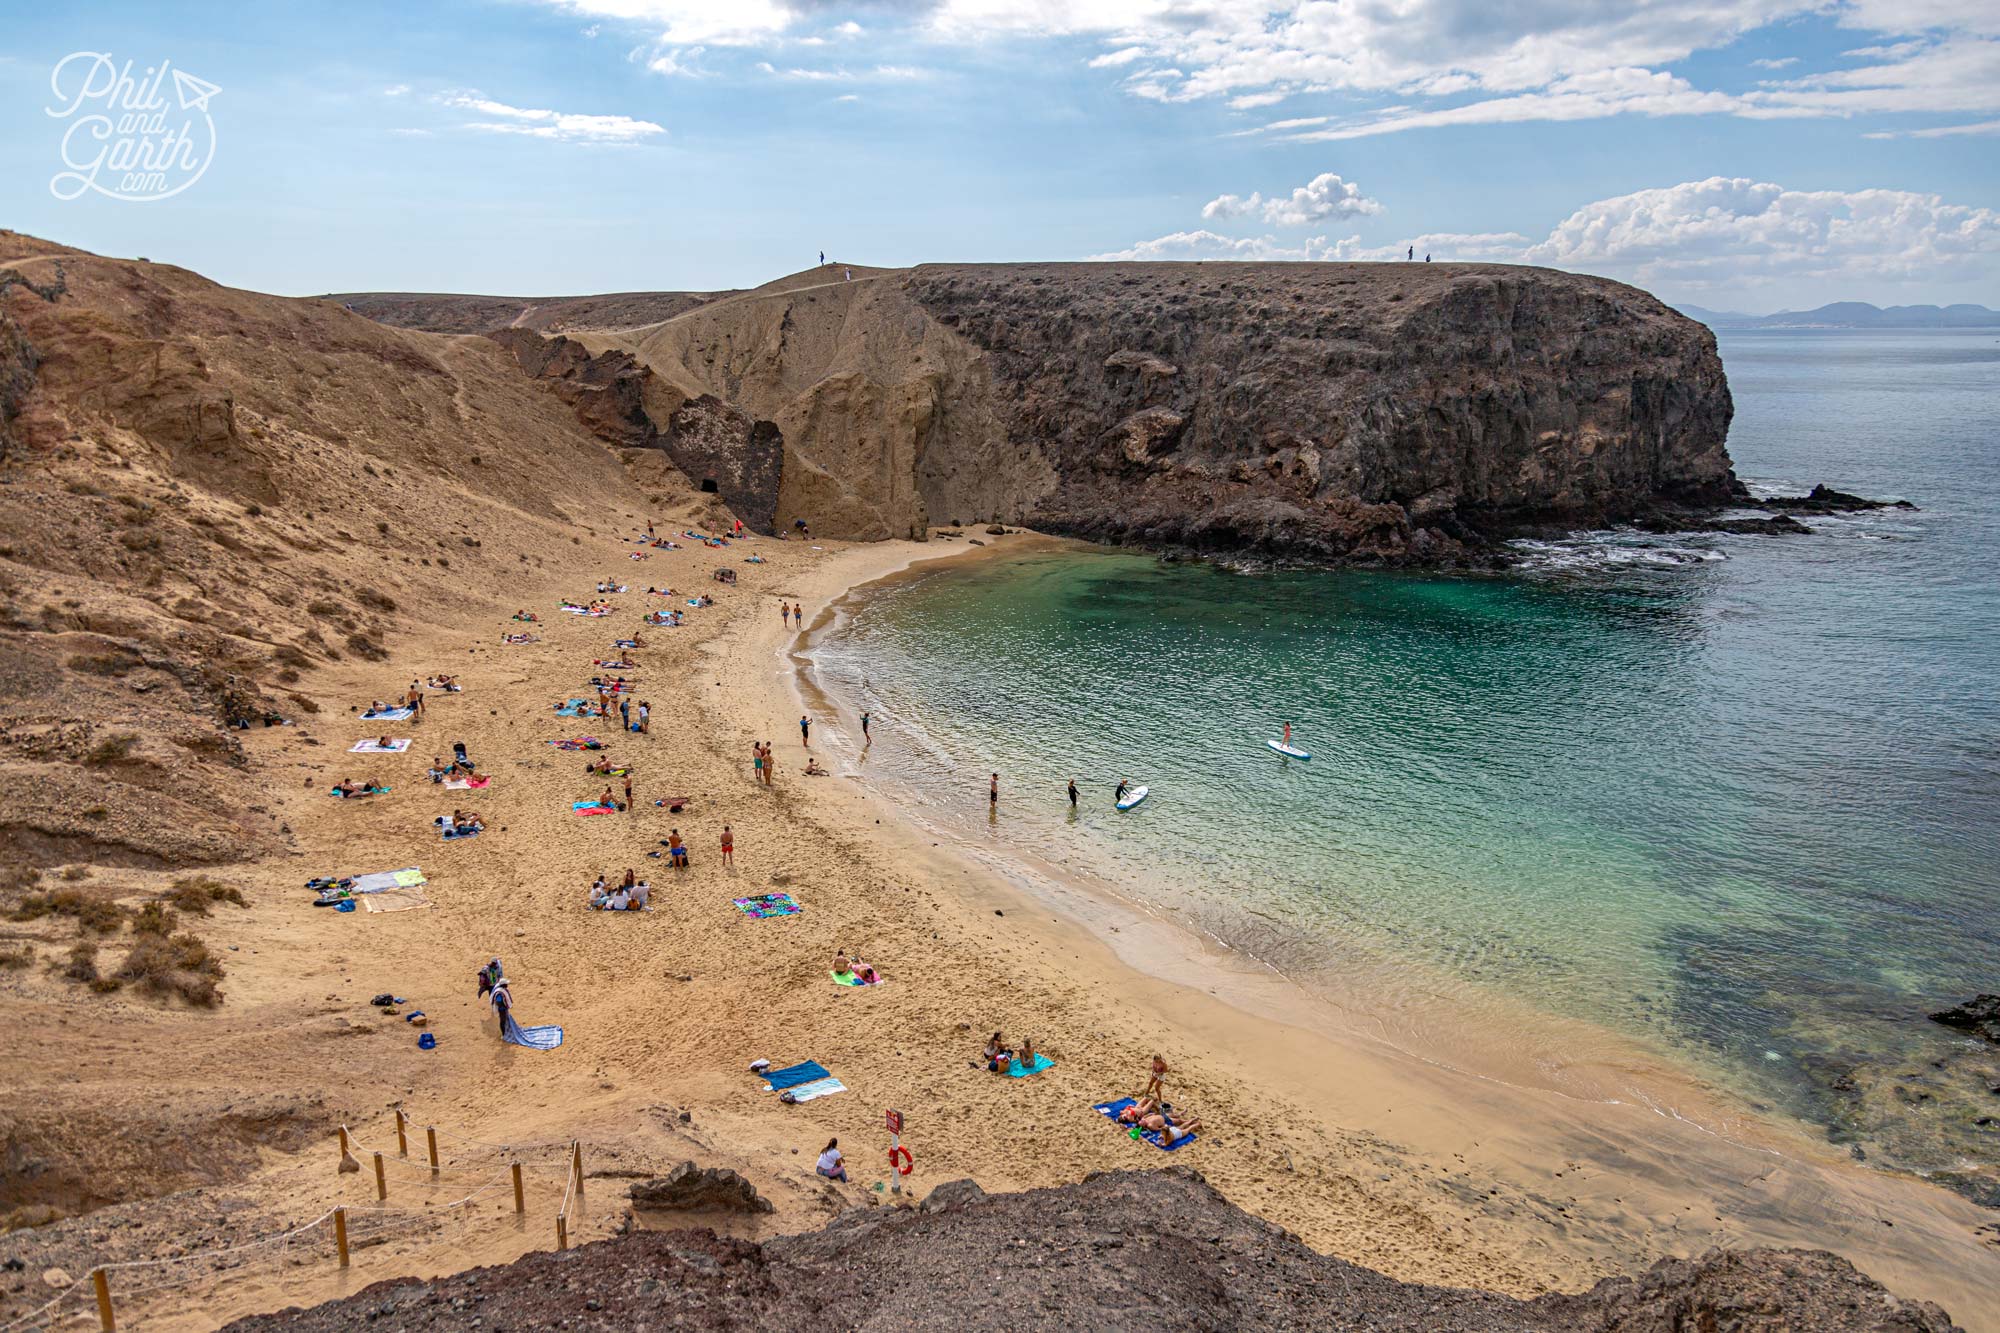 Papagayo Beach is Lanzarote’s famous instagrammed beach